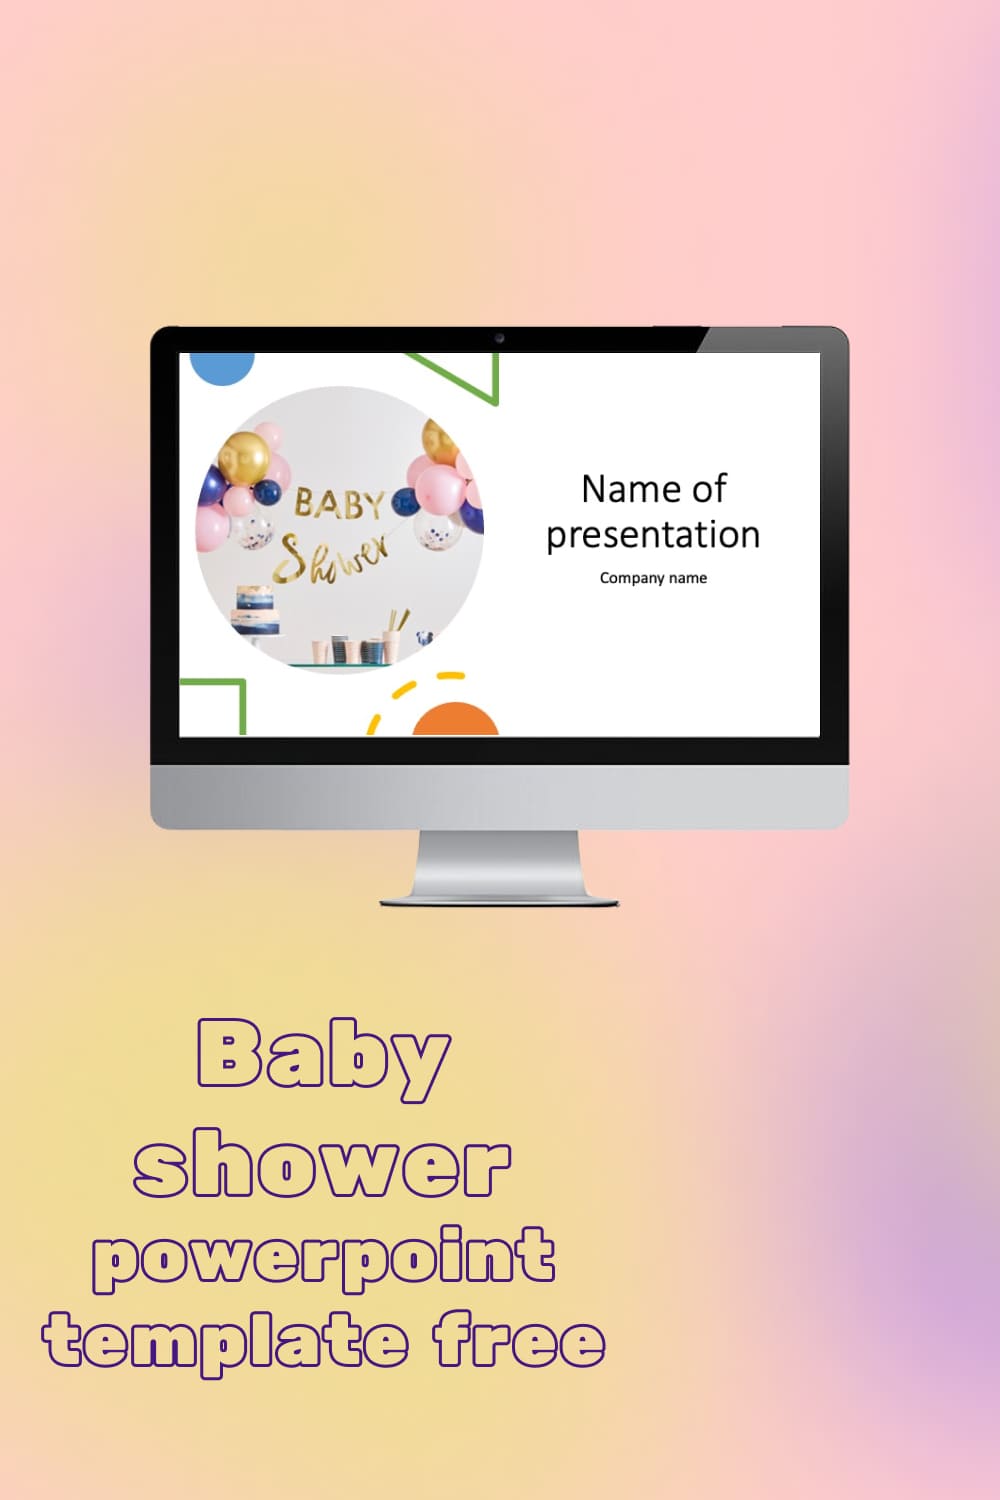 Pinterest of Baby Shower Powerpoint Template Free.